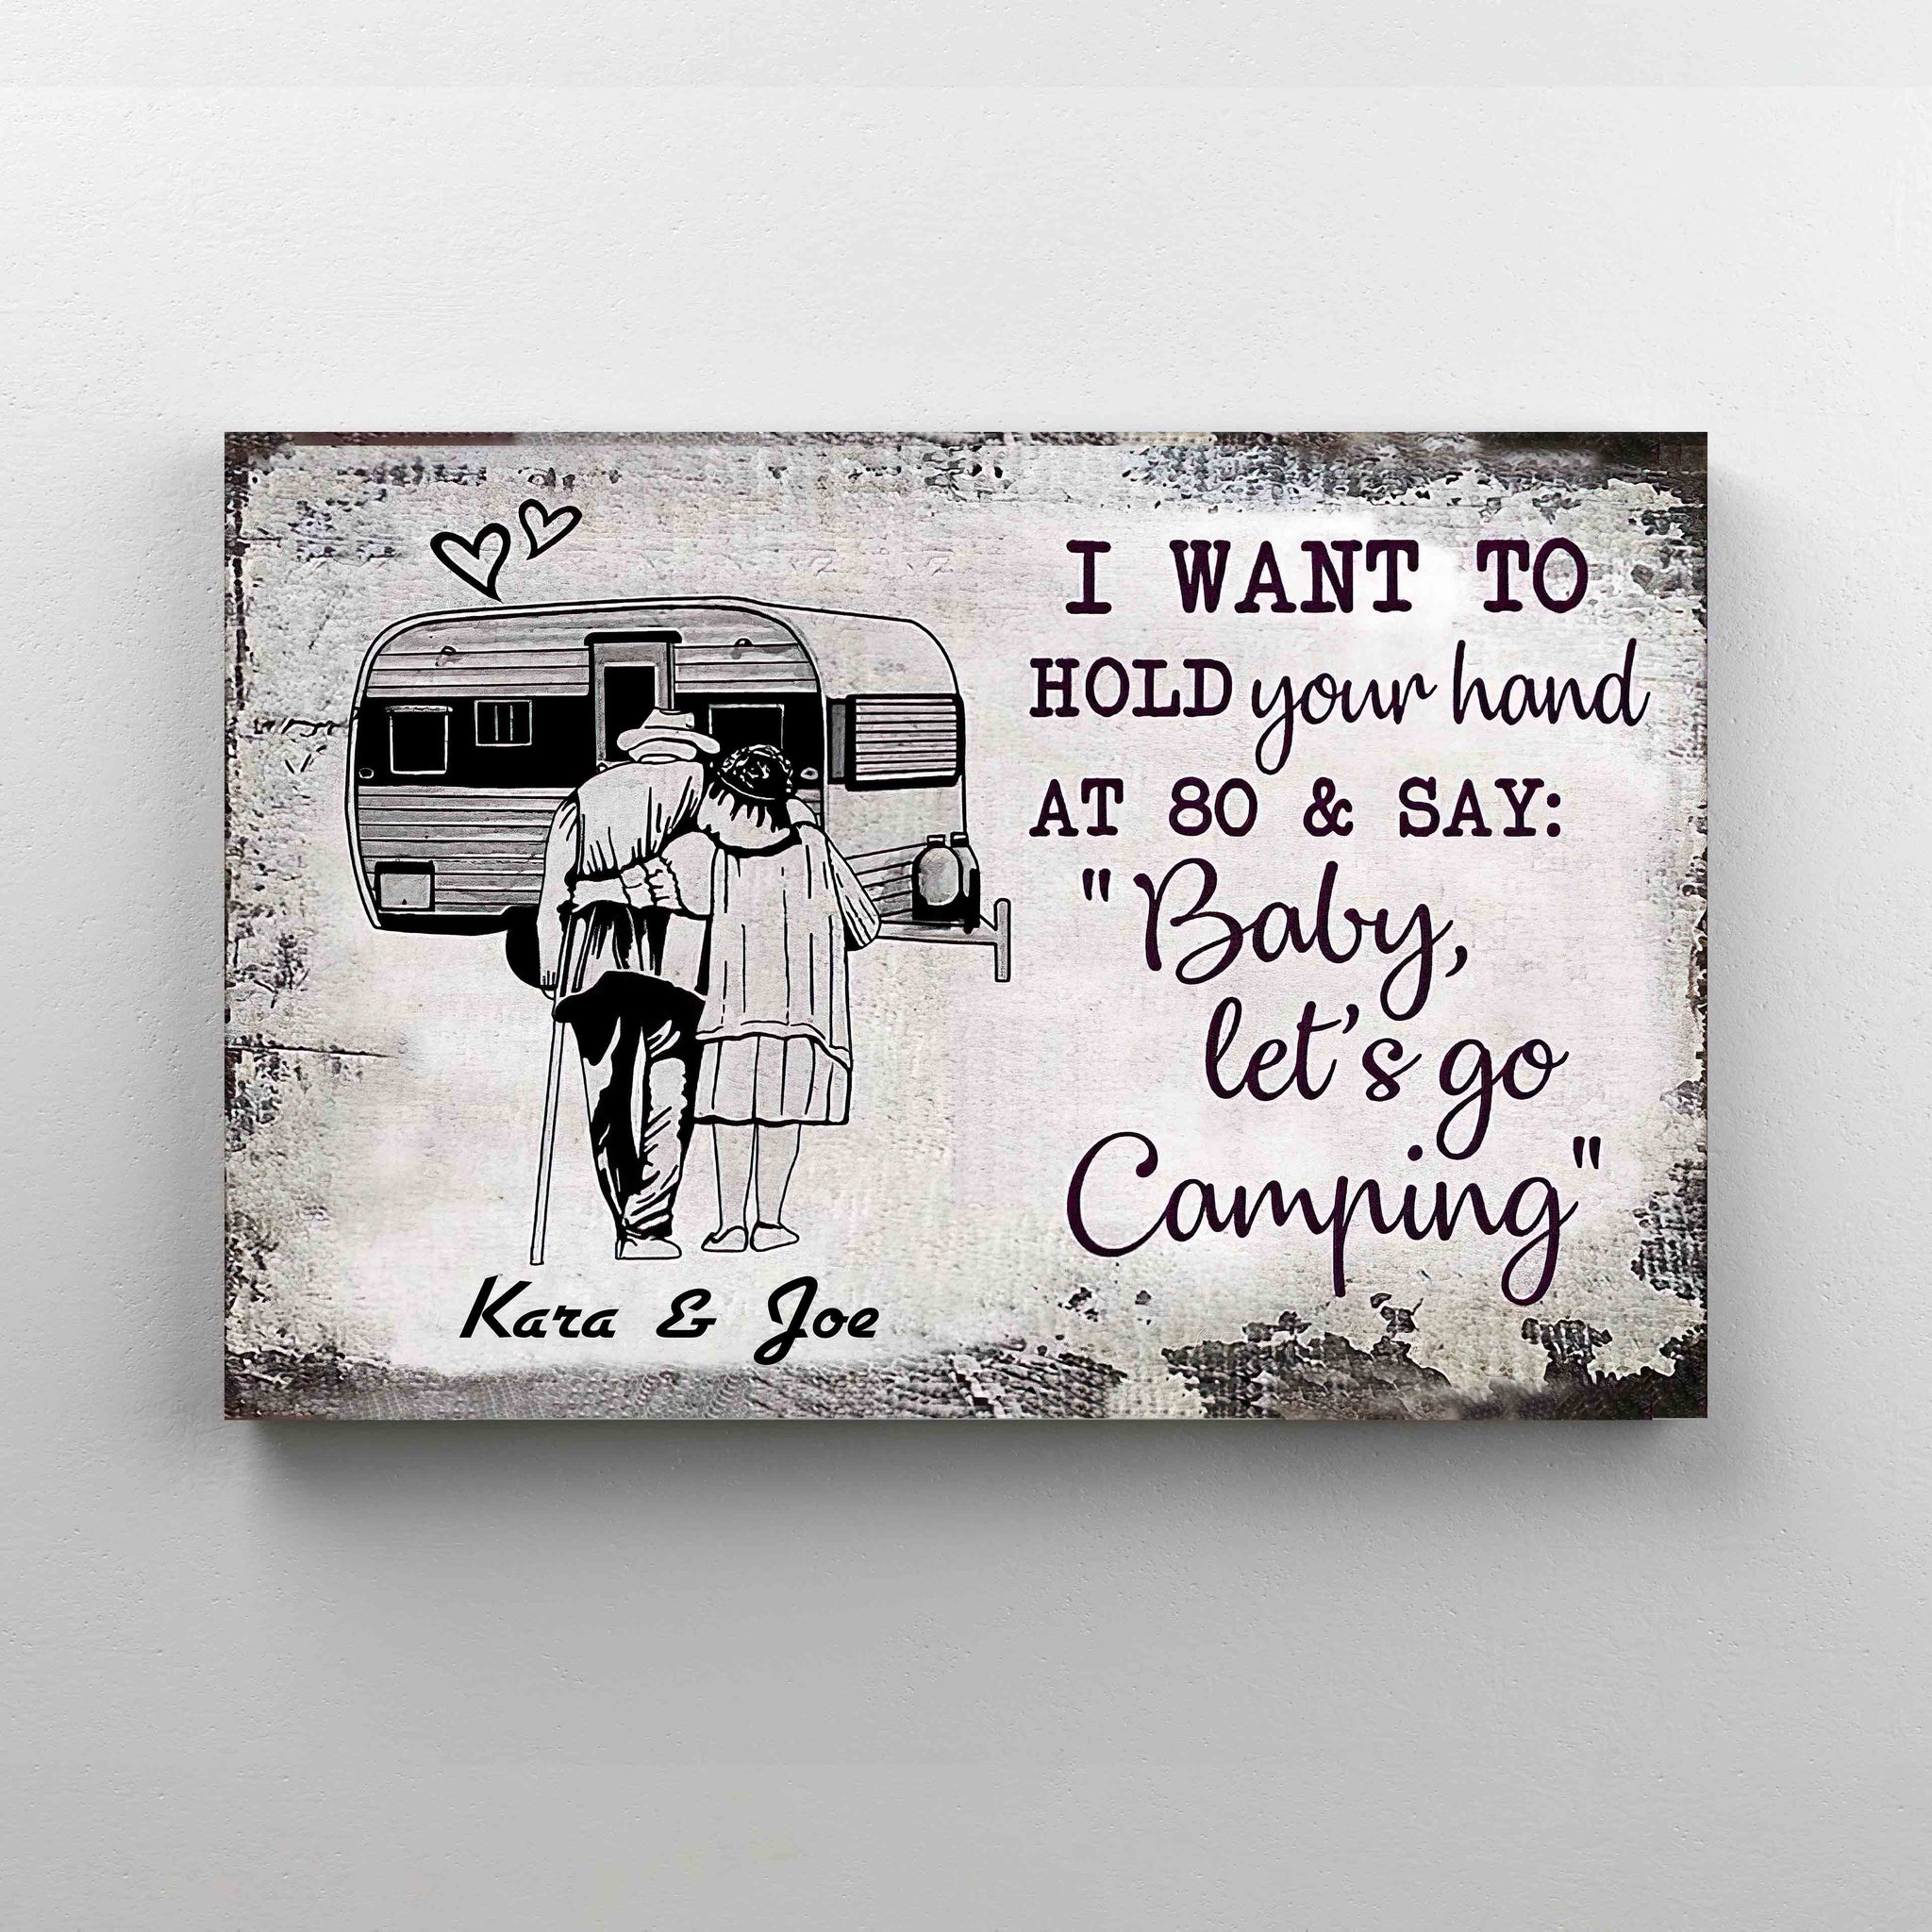 Personalized Name Canvas, I Want To Hold Your Hand Canvas, Wall Art Canvas, Camping Canvas